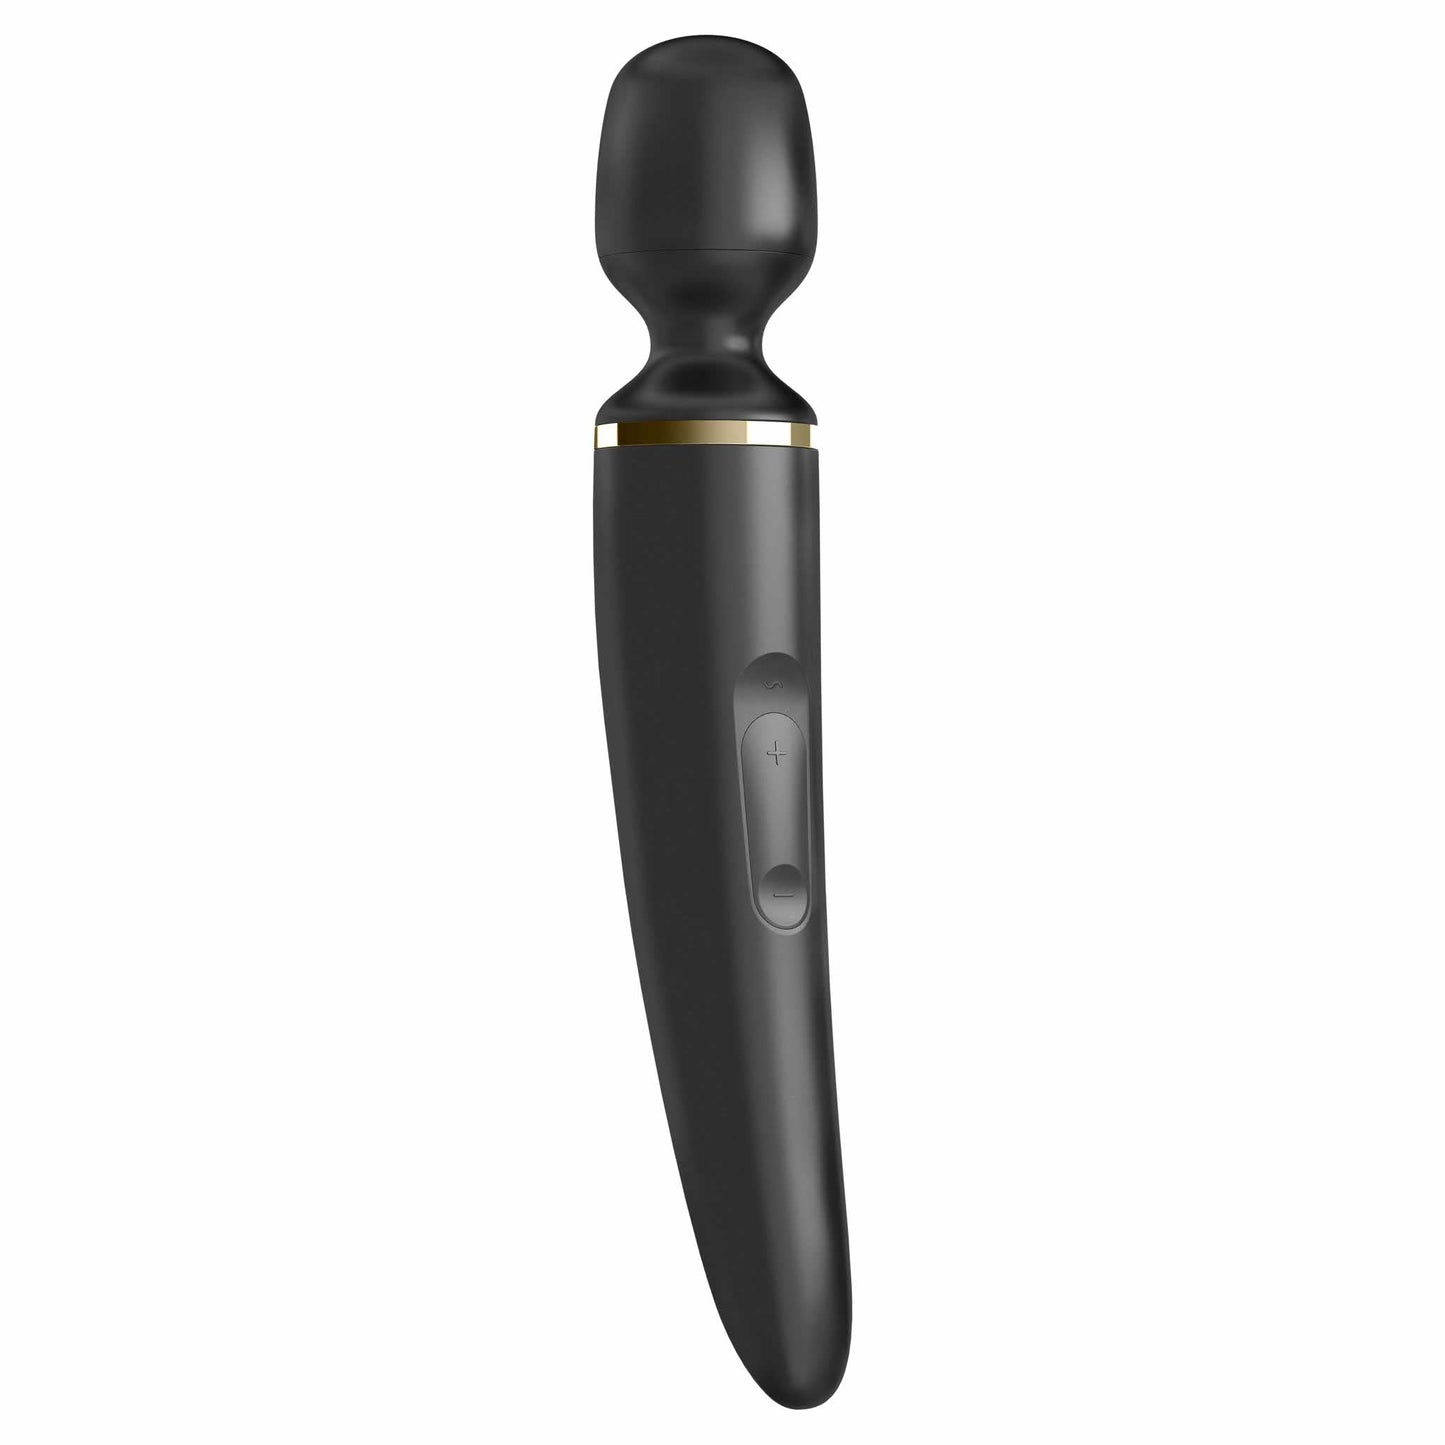 three-quarter view of the satisfyer wand-er woman vibrator eis059 black